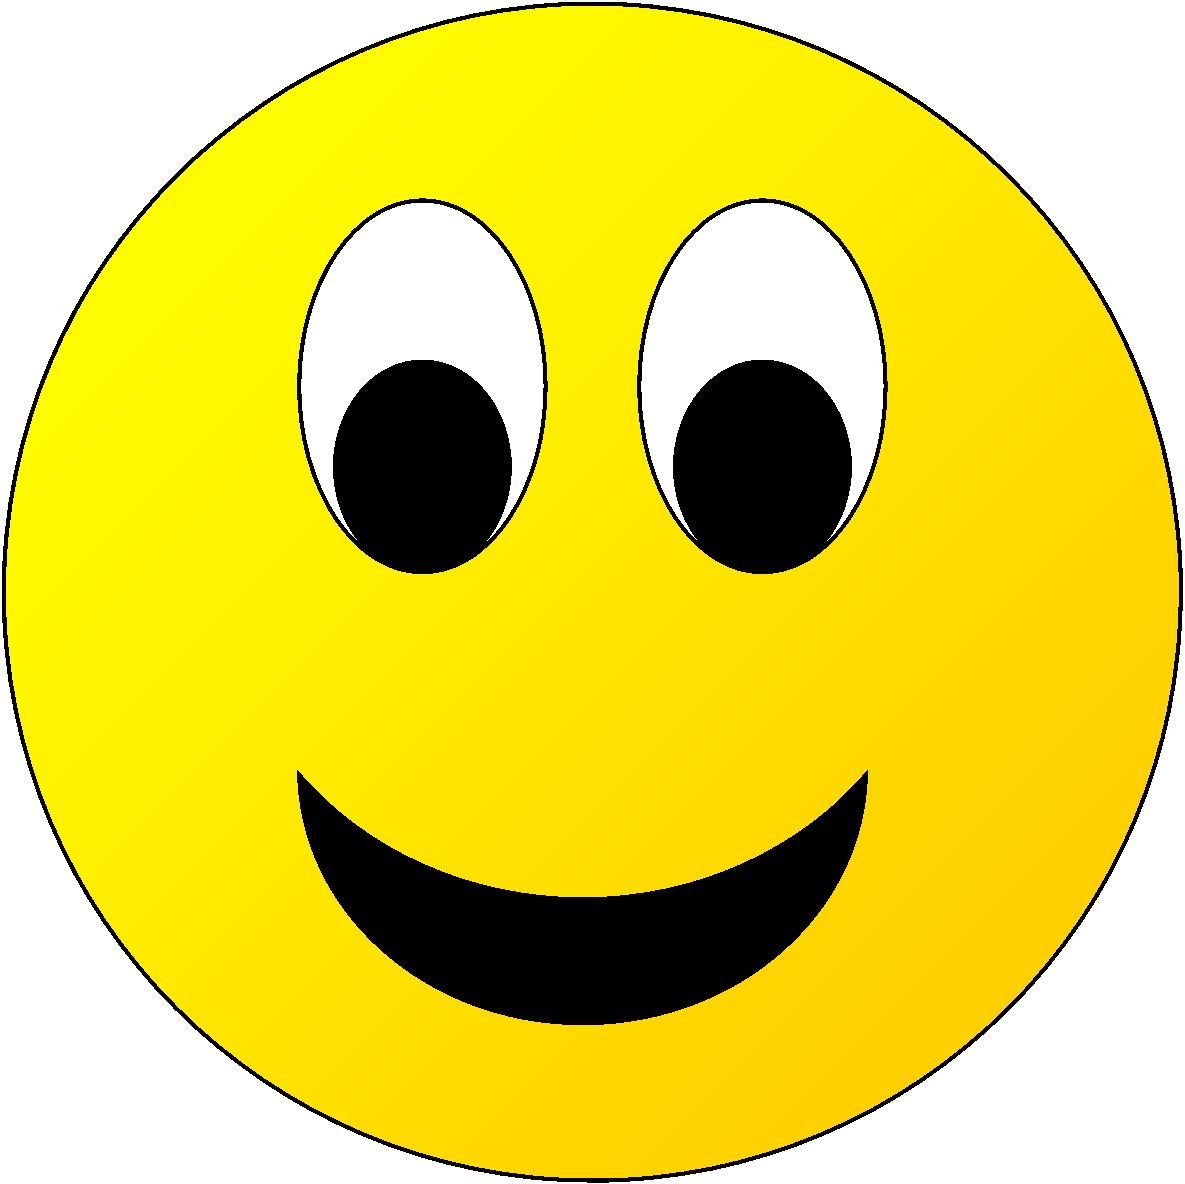 Laughing Smiley Face Animated - Quoteko. - Clipart library - Clipart library